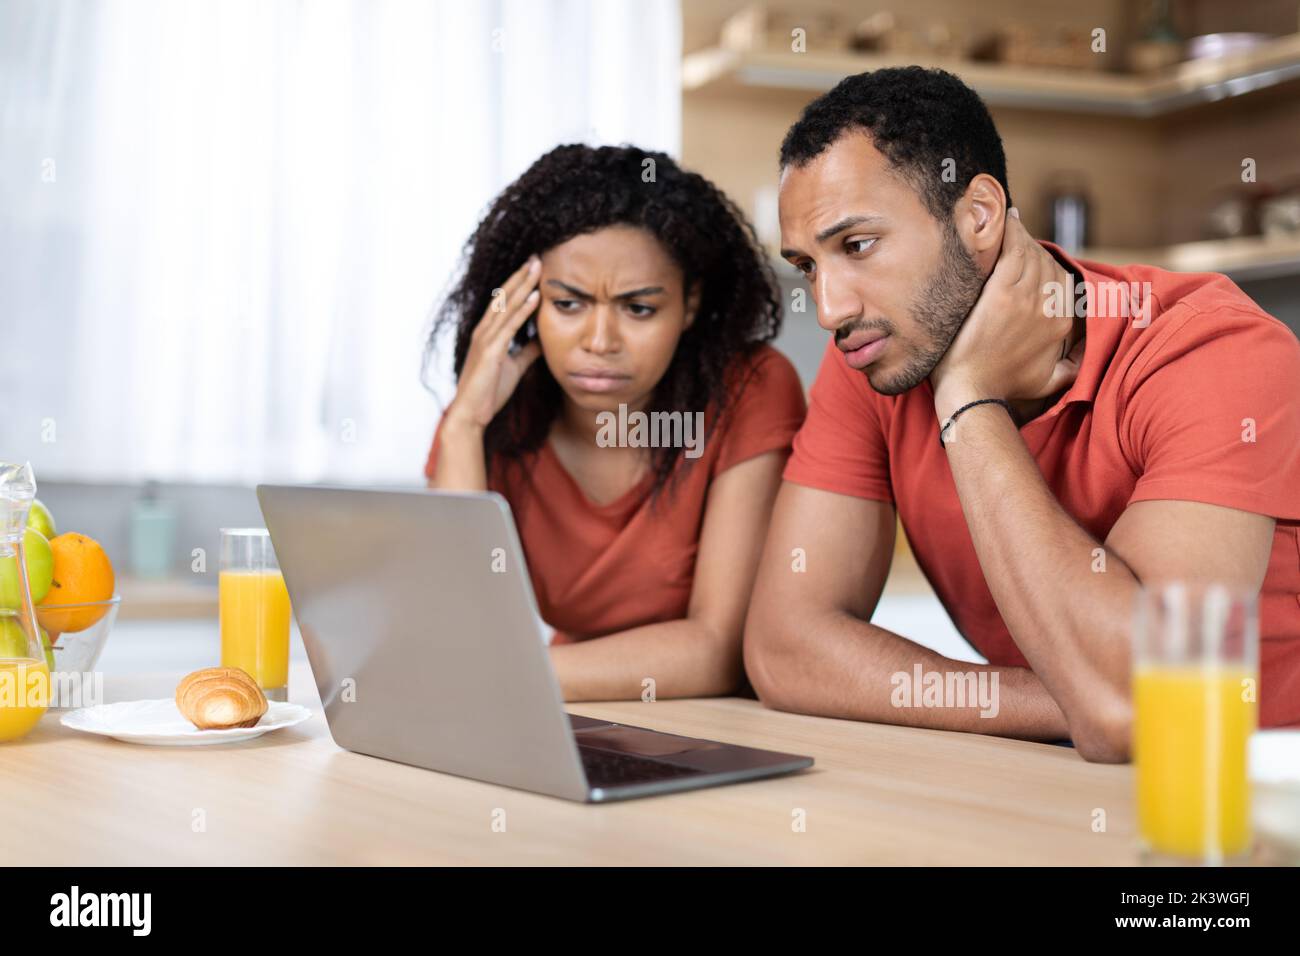 Upset millennial black wife and husband have video call, look at laptop in minimalist kitchen interior Stock Photo